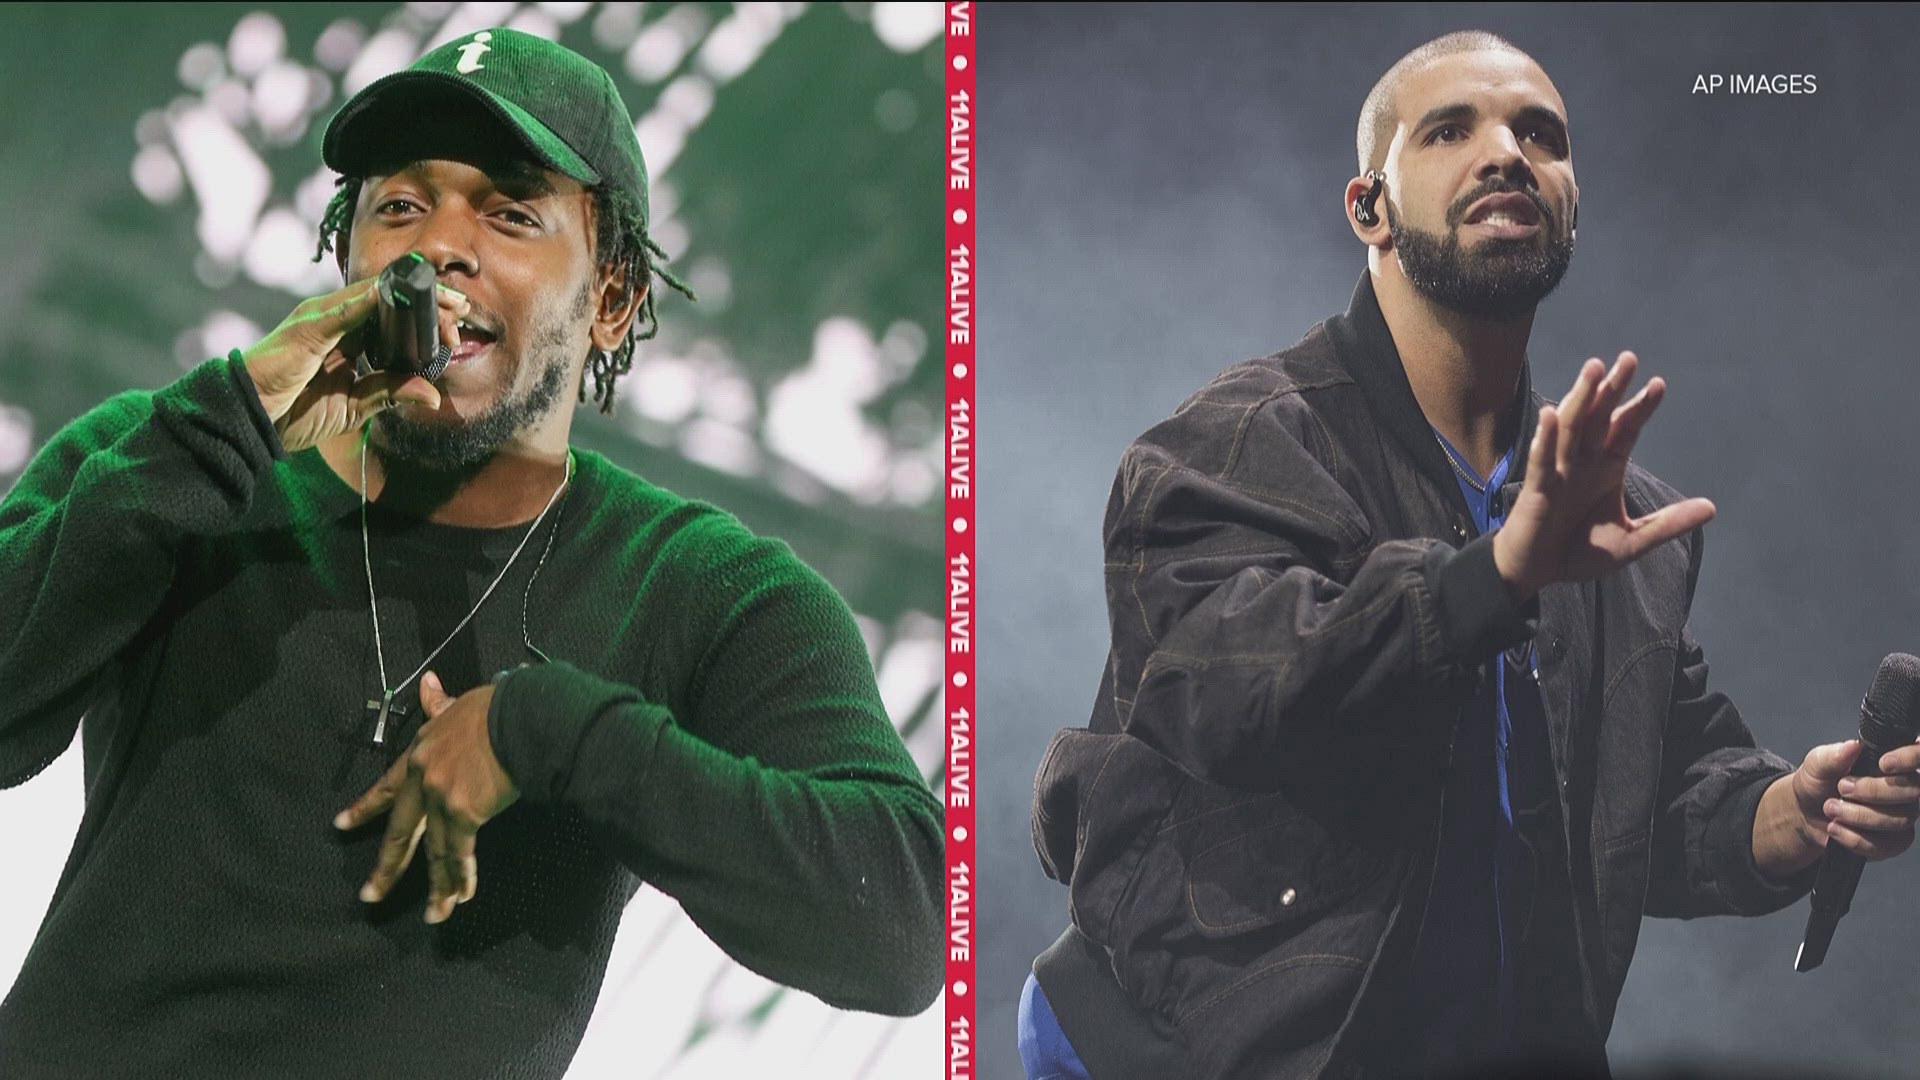 Kendrick Lamar leveled the accusation that Drake is a "colonizer" who effectively appropriates Atlanta's hip-hop sound and culture.